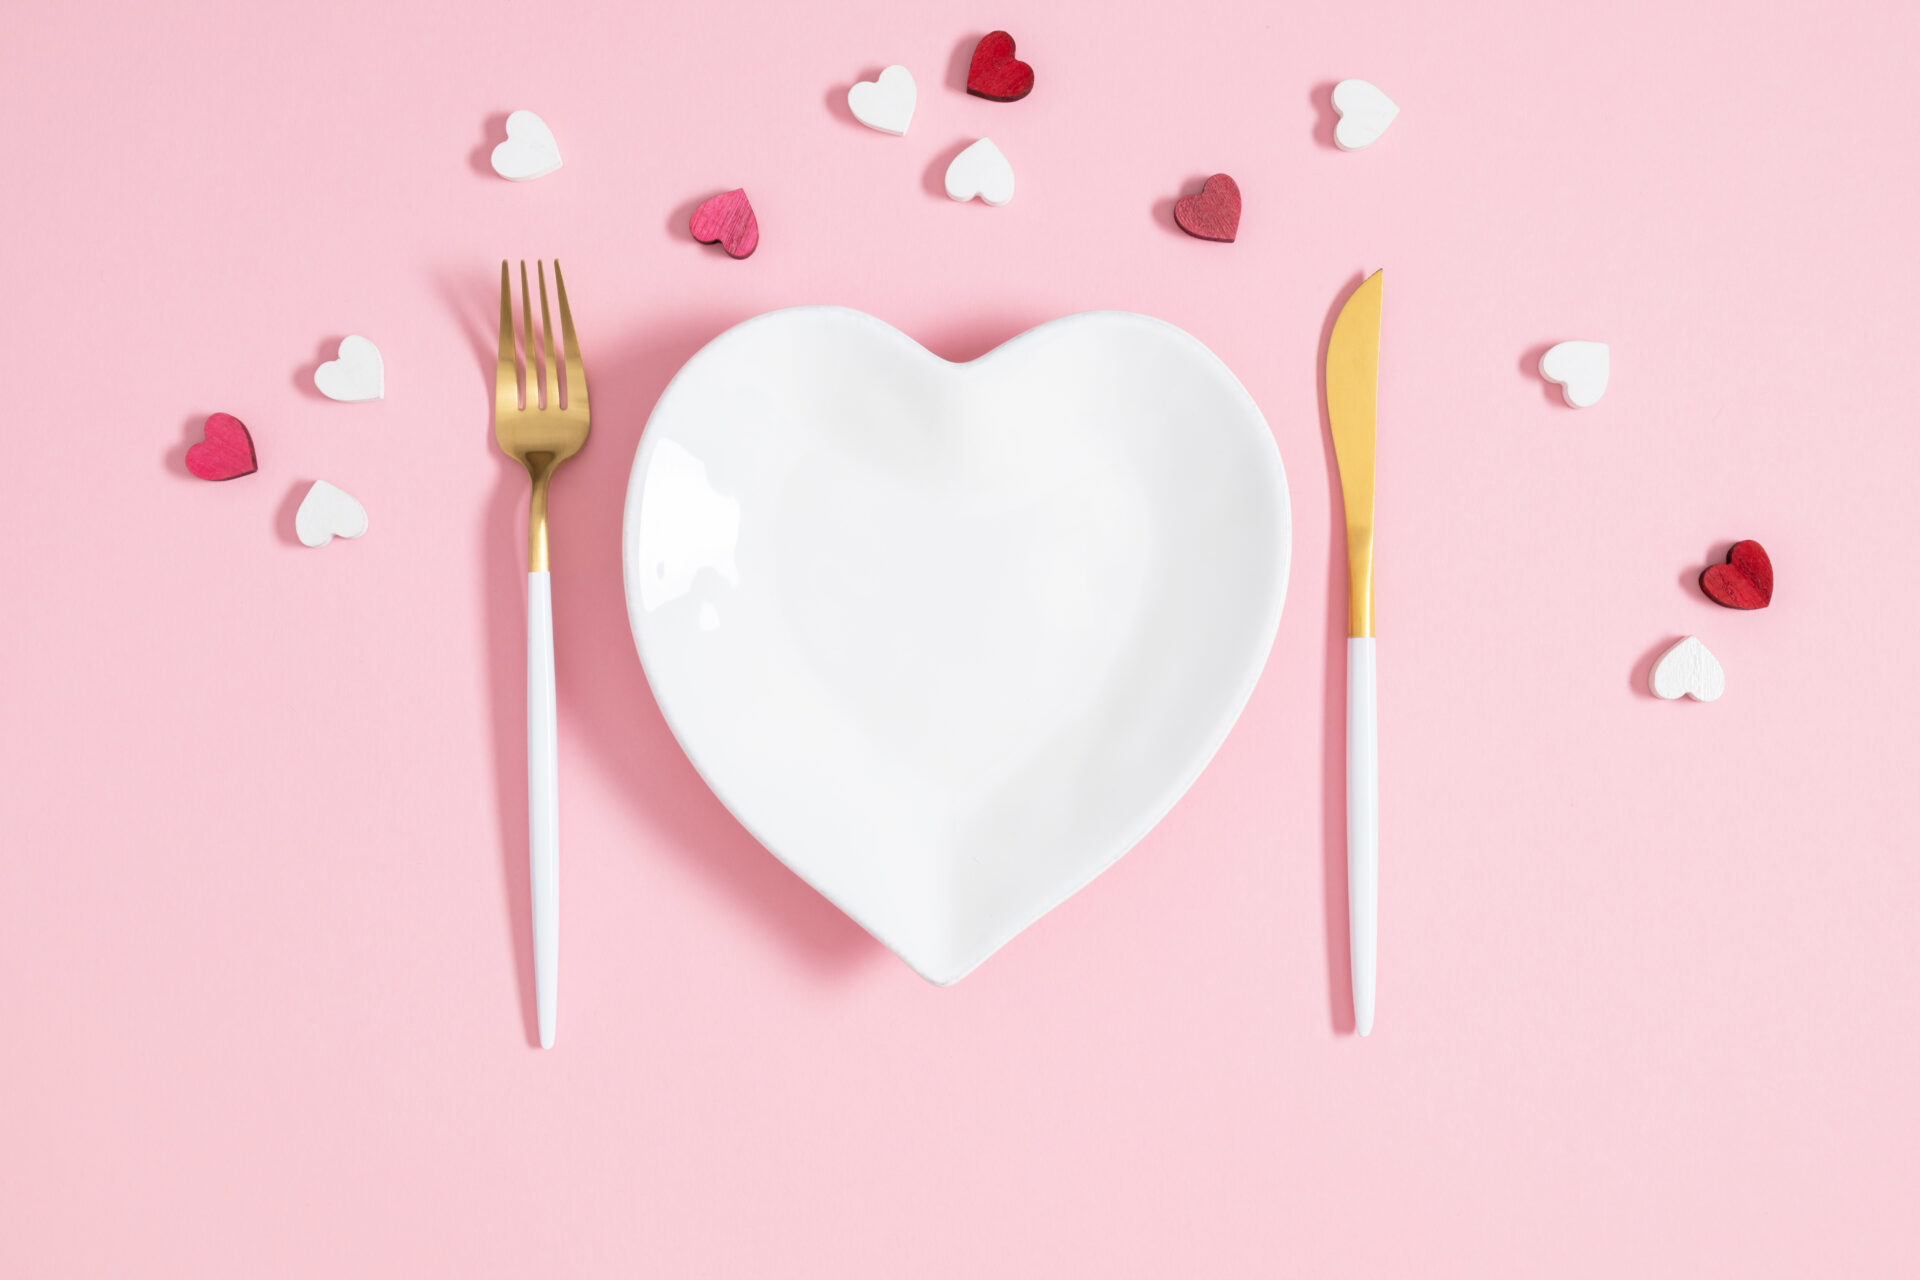 Don’t spend your whole paycheck on Valentine’s Dinner! These three tricks will make home cooking just as good (if not better)!